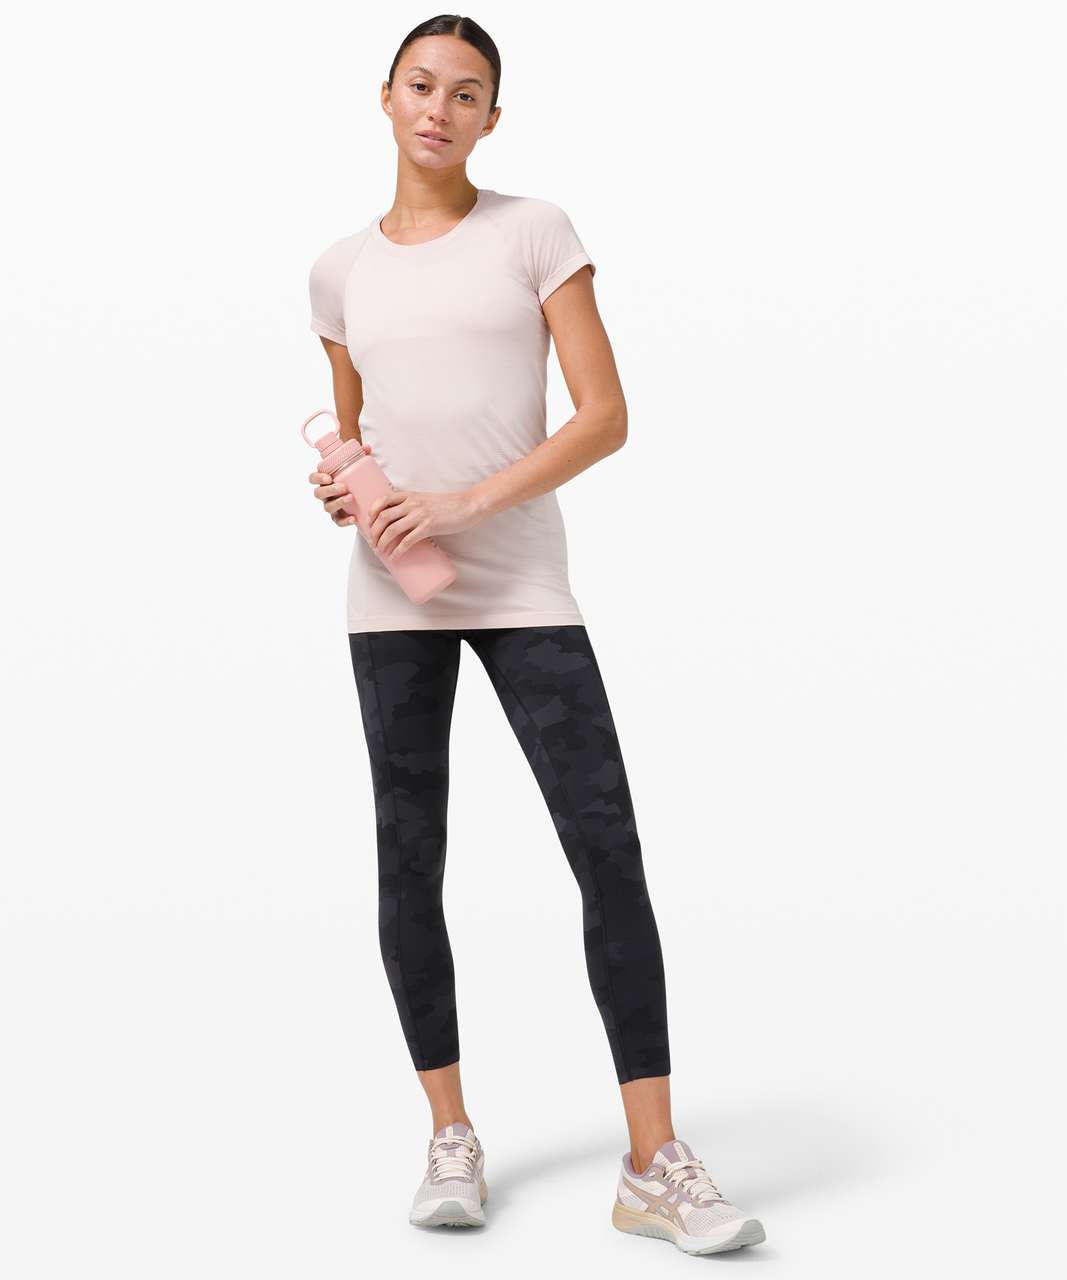 Lululemon Swiftly Tech Short Sleeve 2.0 - Feather Pink / Feather Pink